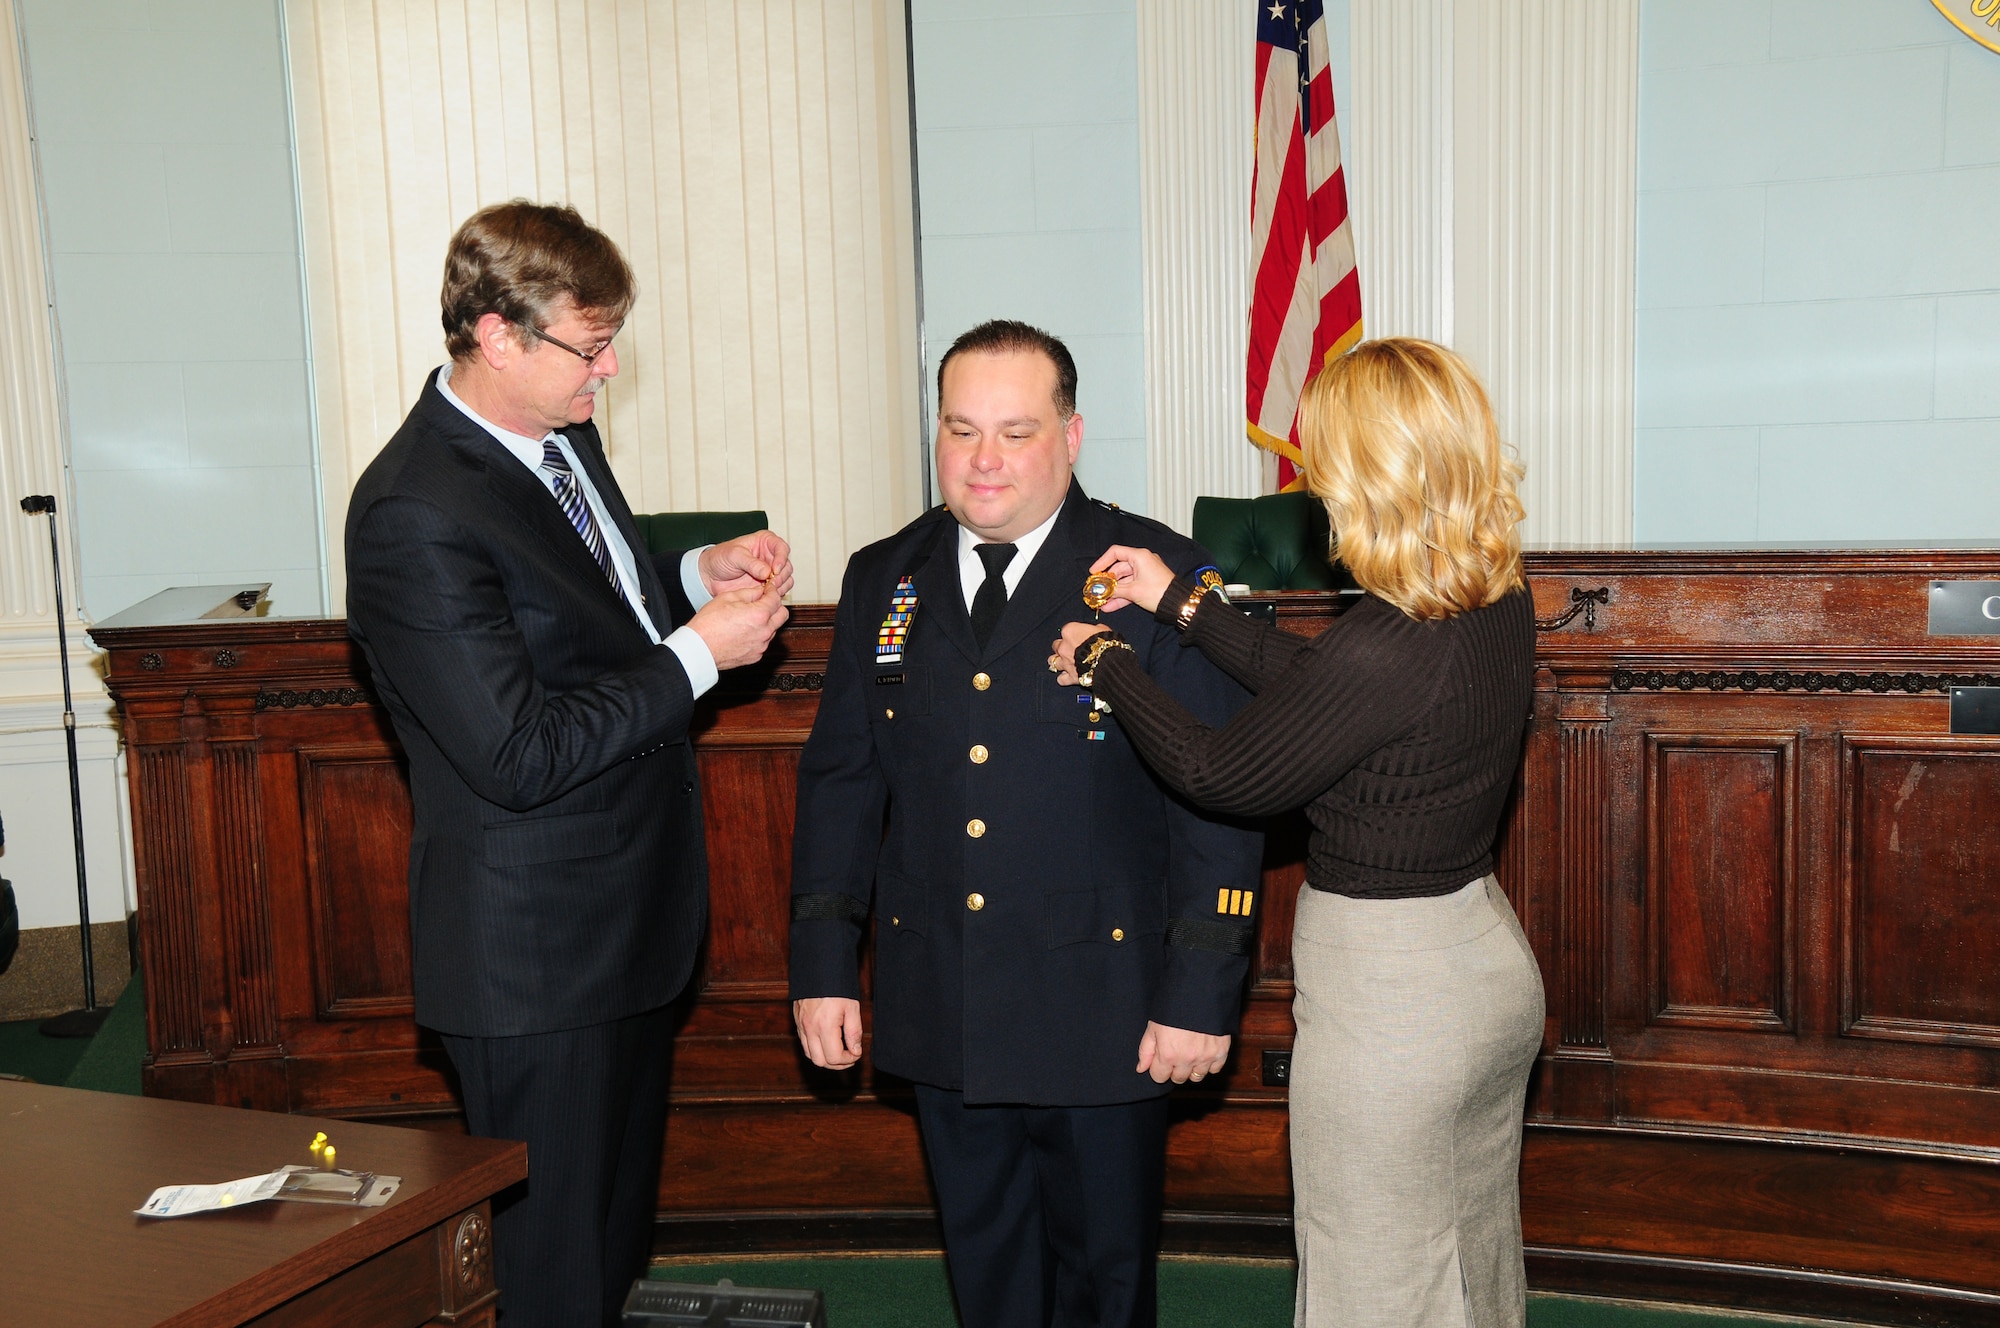 Major Bryan DalPorto, 107th Airlift Wing's Force Support Squadron (FSS) Commander was named the new police superintendent for the city of Niagara Falls N. Y.  Mayor Paul Dyster and wife Eveyln DalPorto pin the badge and rank on Jan, 4, 2013 (Air National Guard  Photo/Senior Master Sgt Ray Lloyd)

